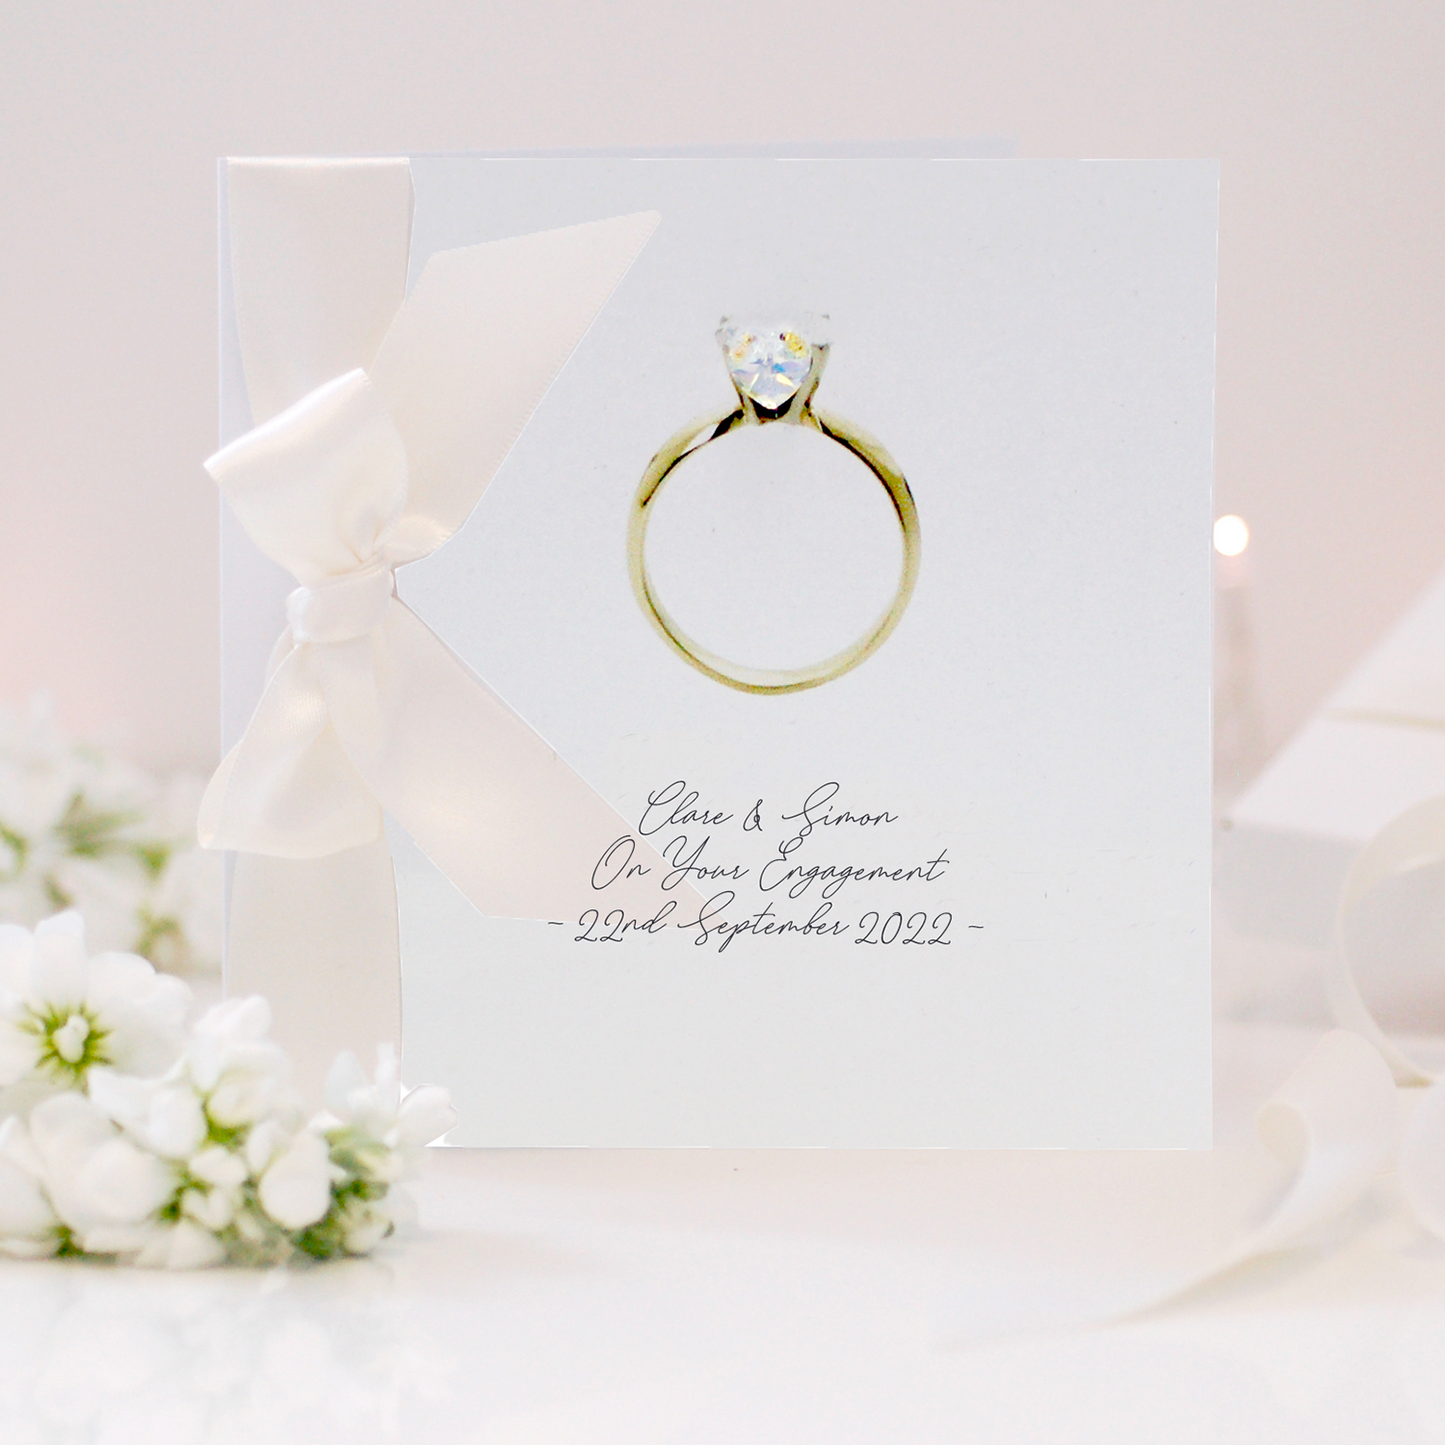 Personalised Diamond Ring Engagement Card | Handmade with choice of Swarovski Crystal and ribbon colour | Add your own message | The Luxe Co